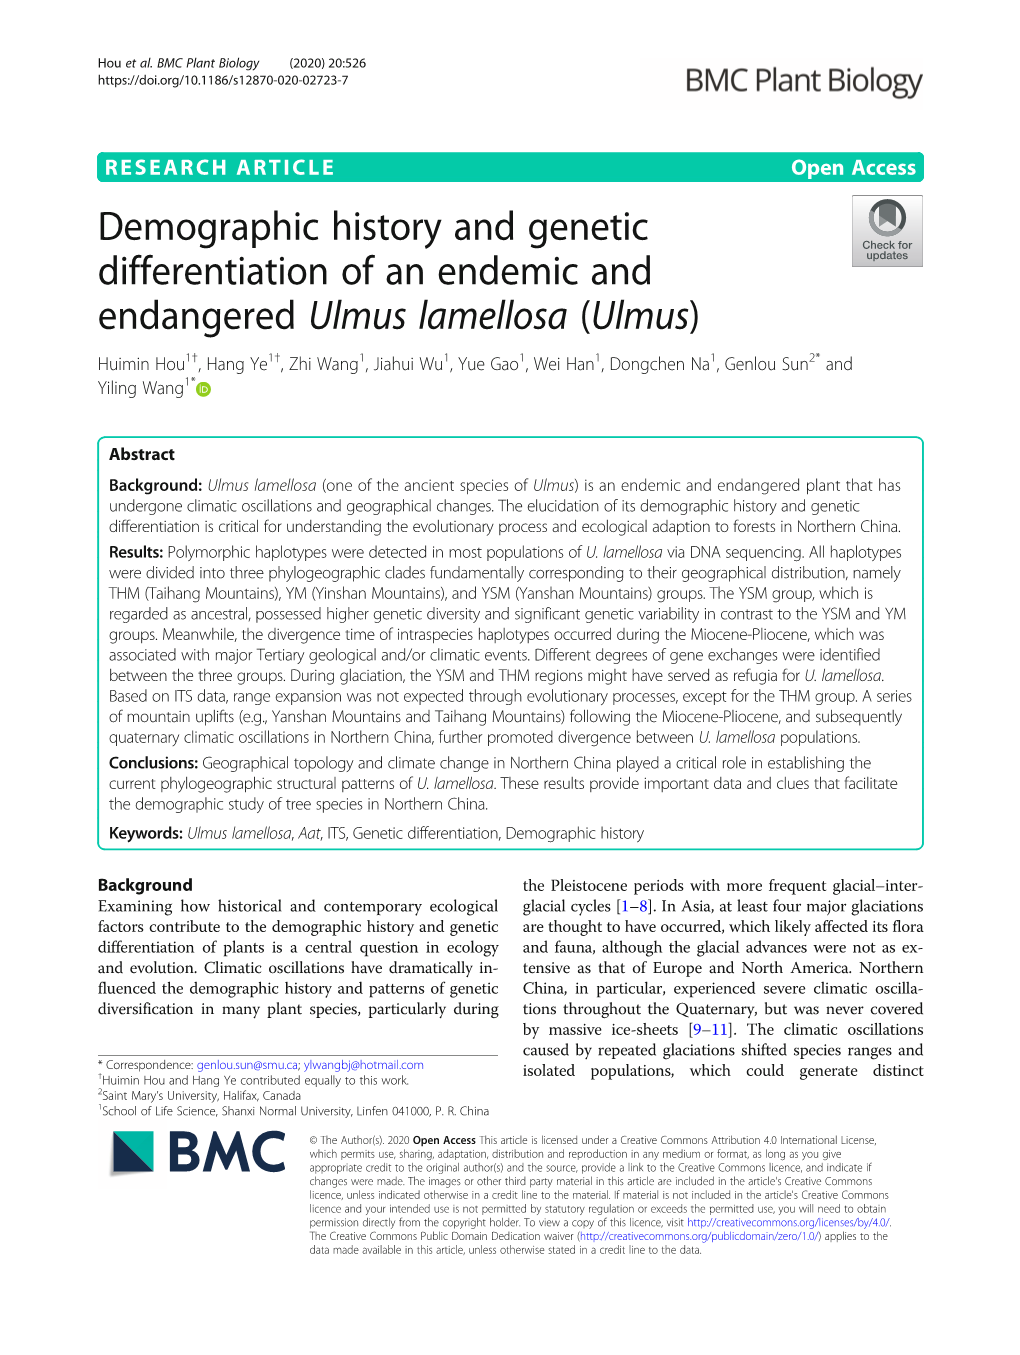 Demographic History and Genetic Differentiation of an Endemic And